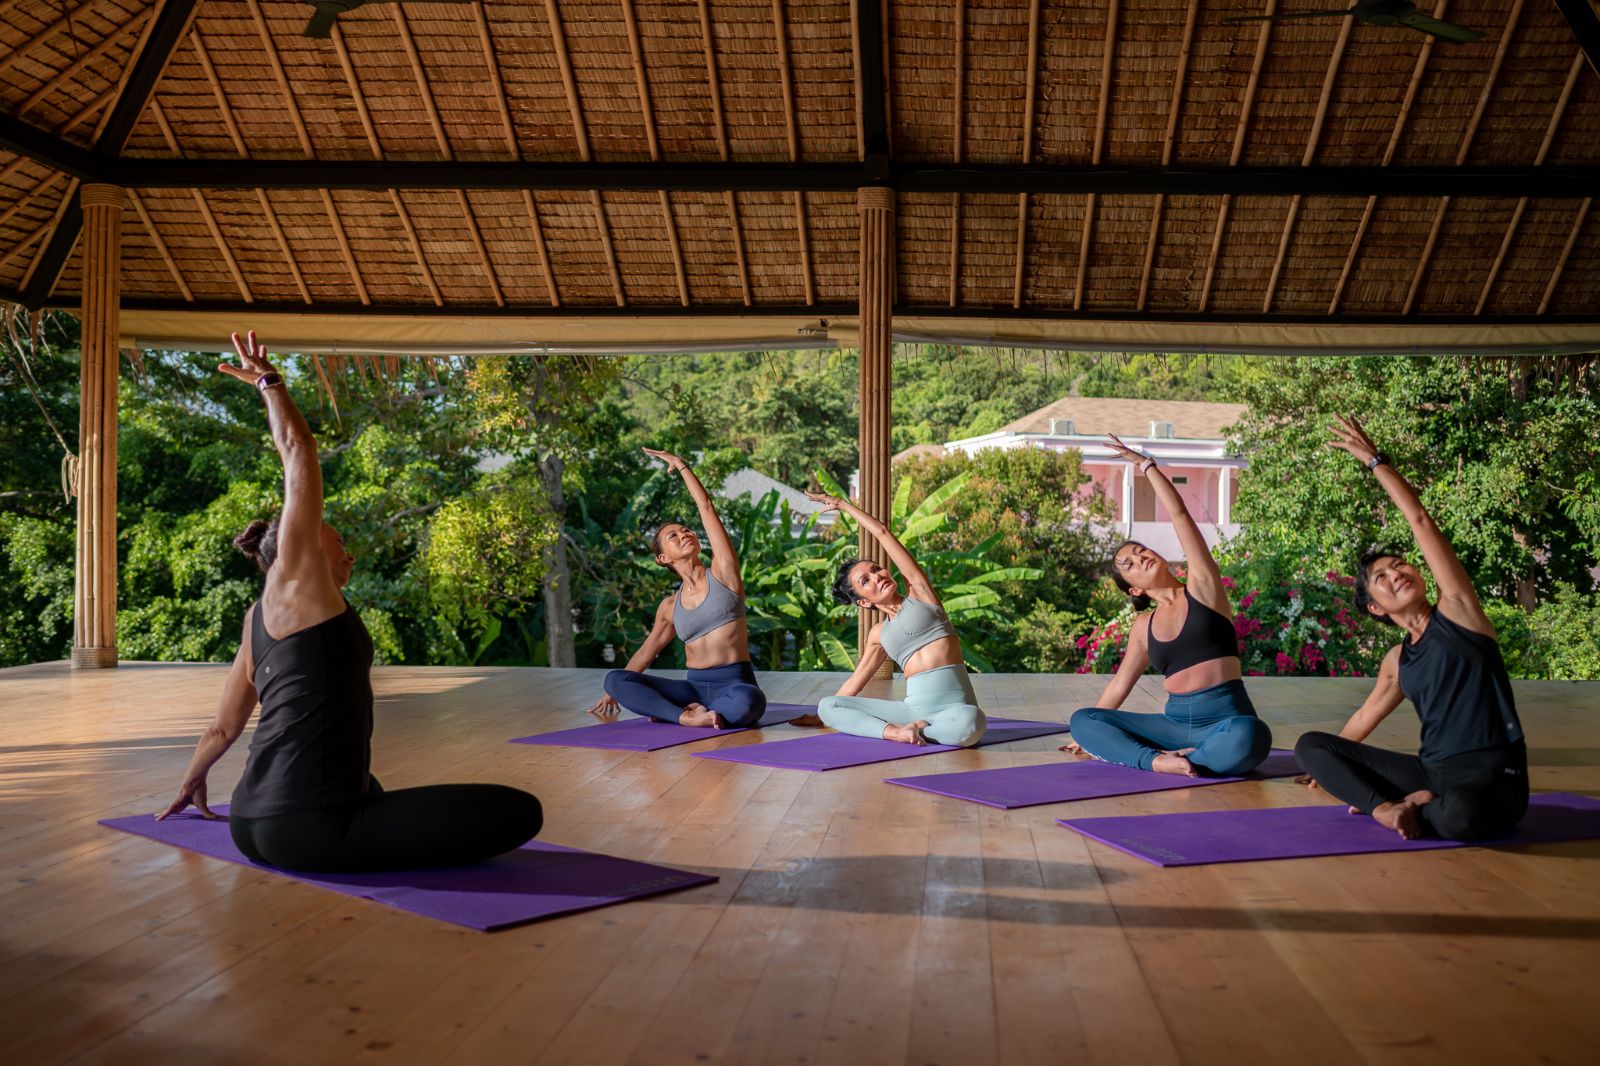 Group Yoga sessions in outdoor building at luxury zen resort Absolute Sanctuary 